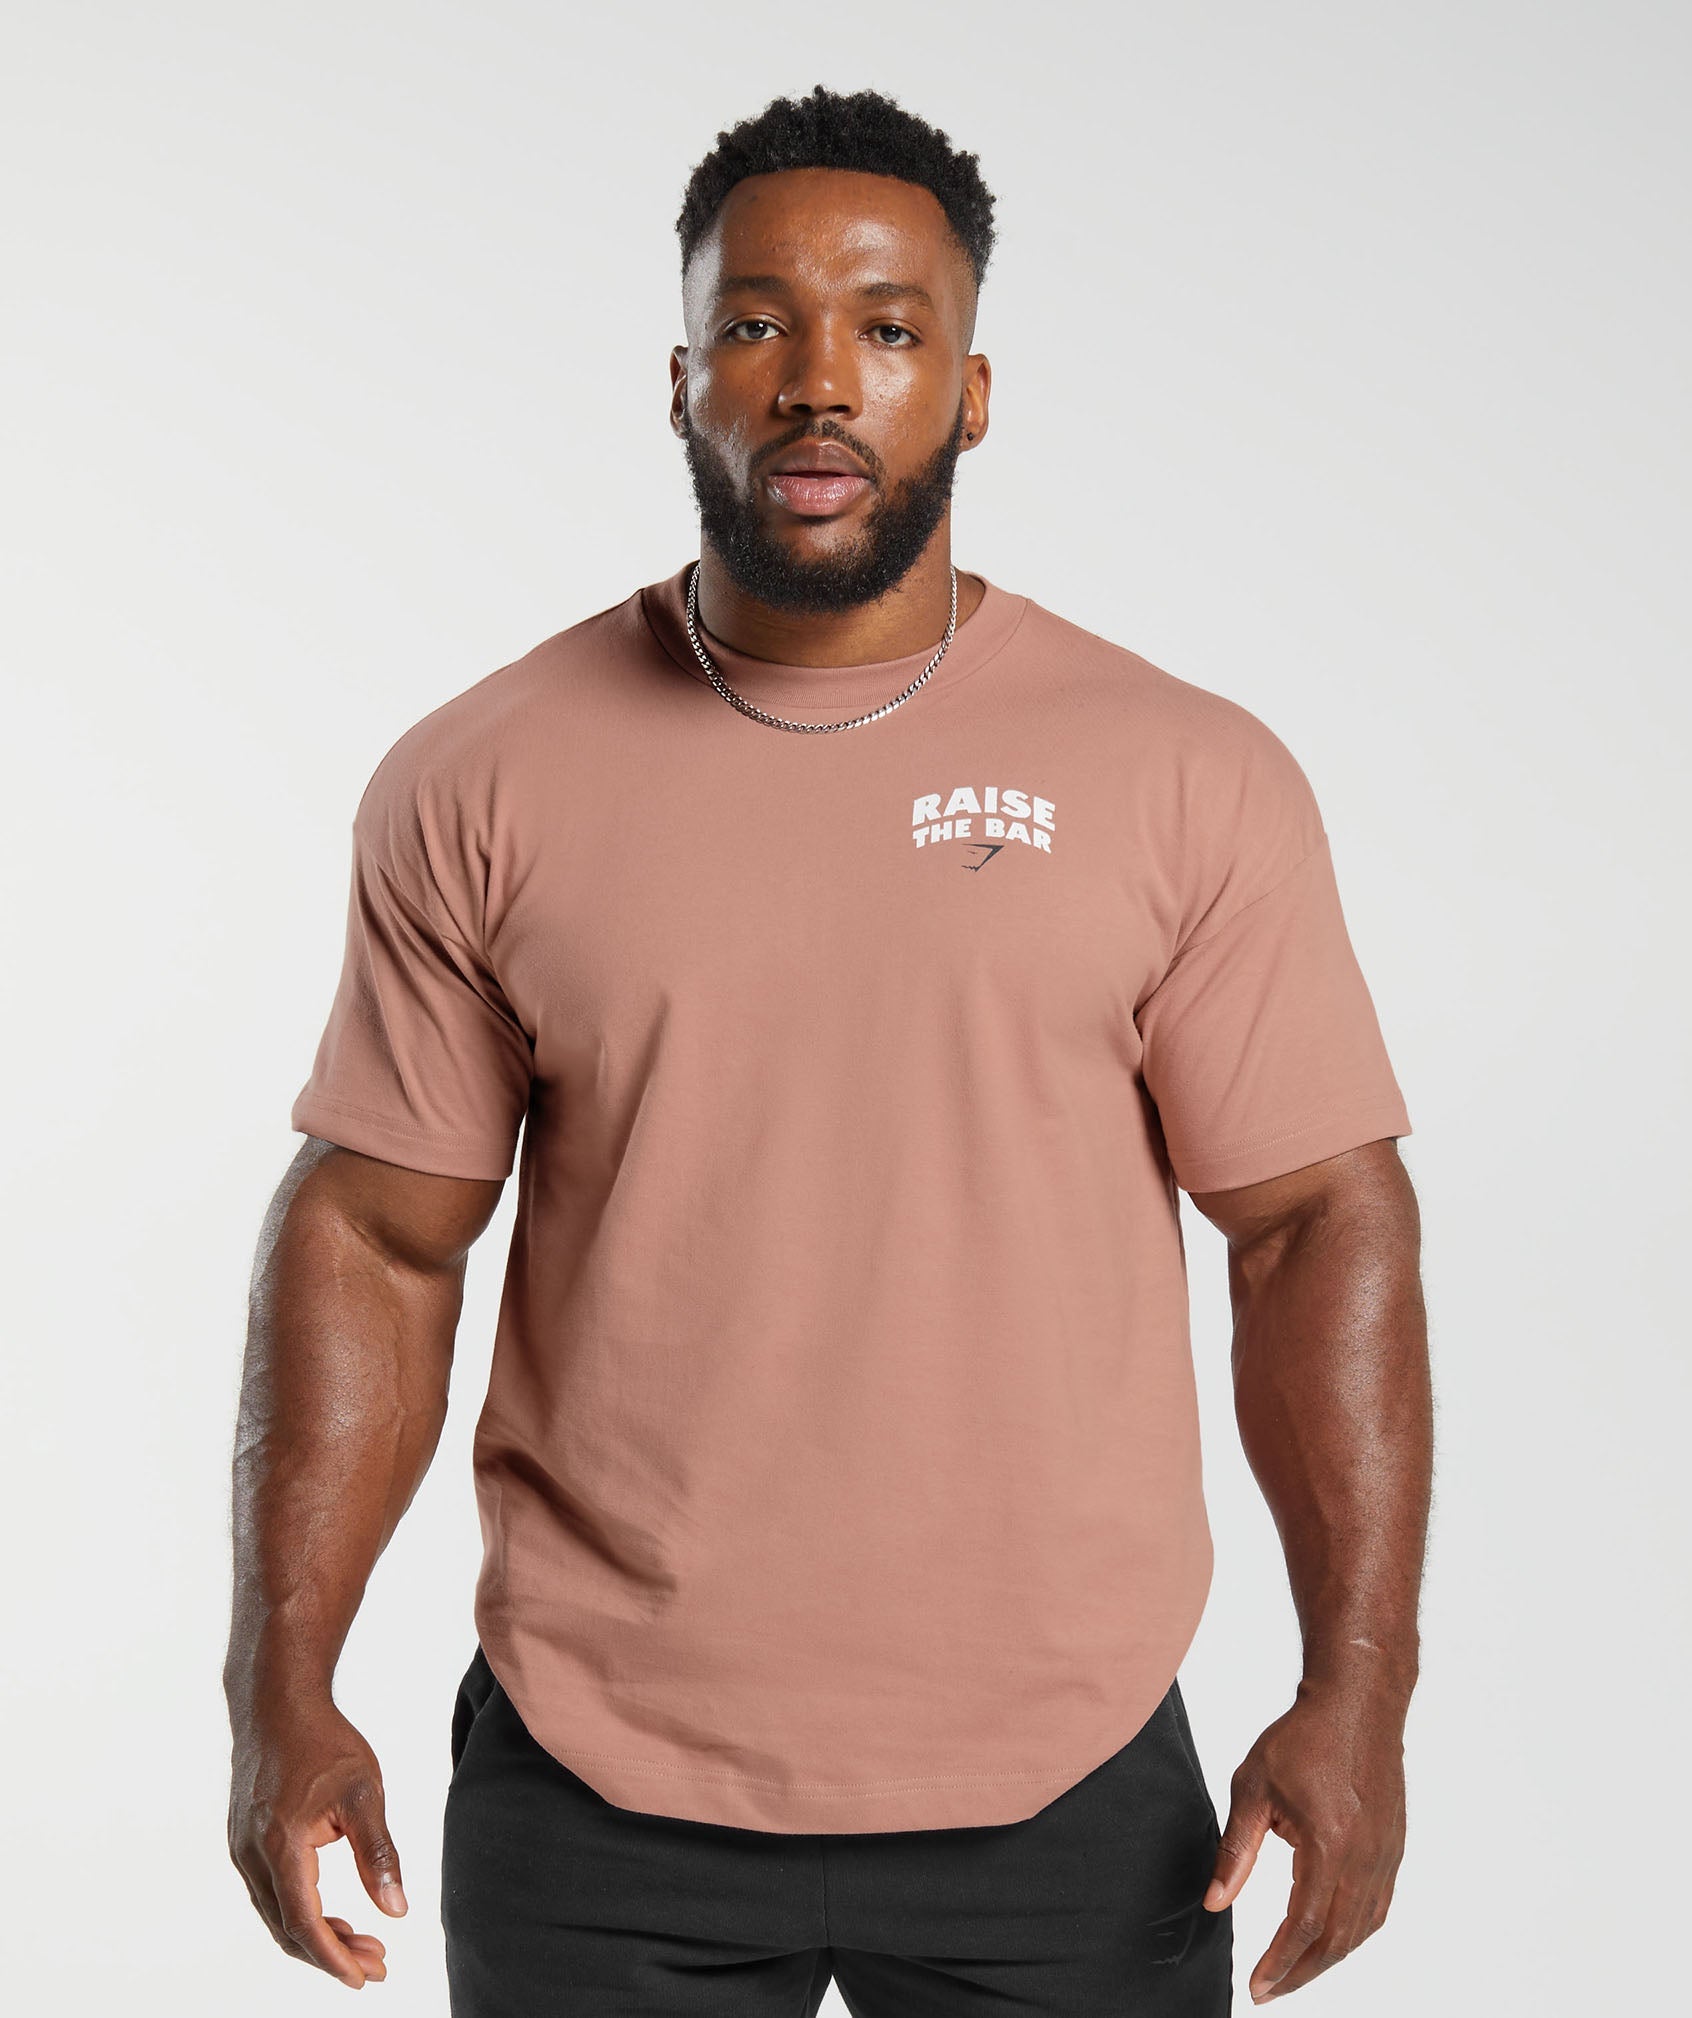 Raise the Bar T-Shirt in Faded Pink - view 2